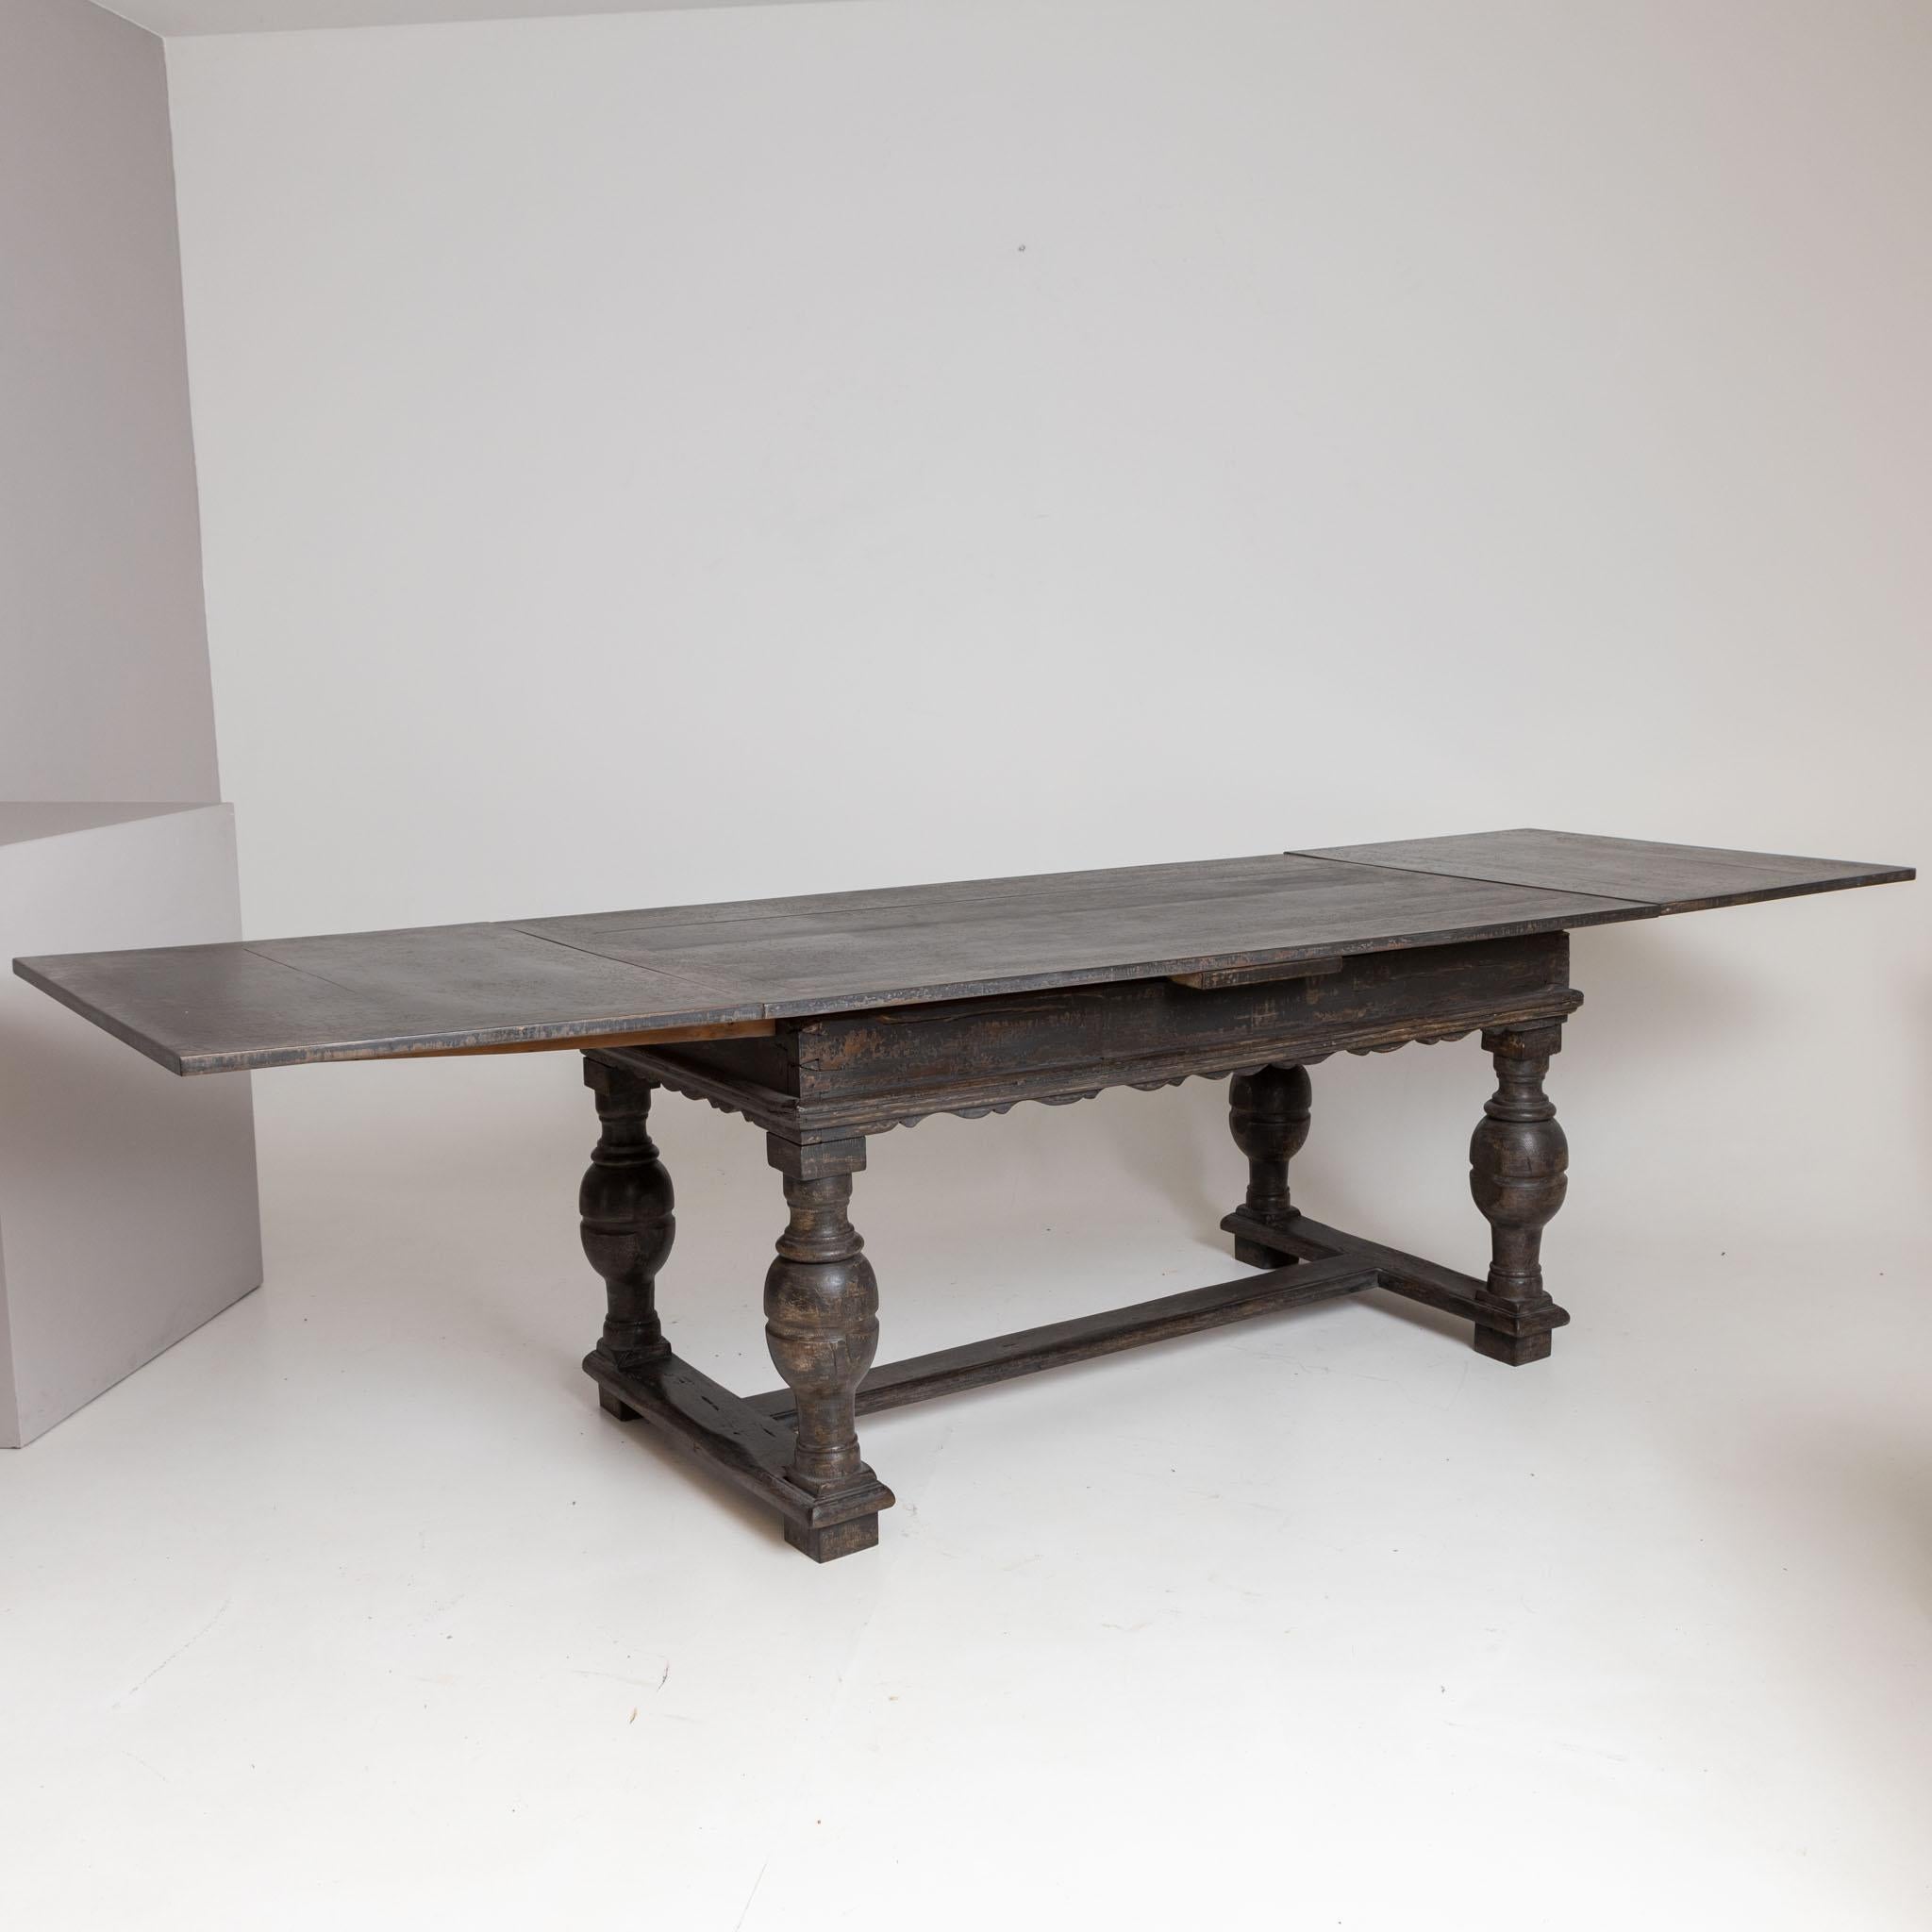 Large dining table with curved frame and baluster legs and H-shaped bracing. The table has a maximum dimension of 74.5 x 296 x 90 cm. The gray setting is new and has been decoratively rubbed through.